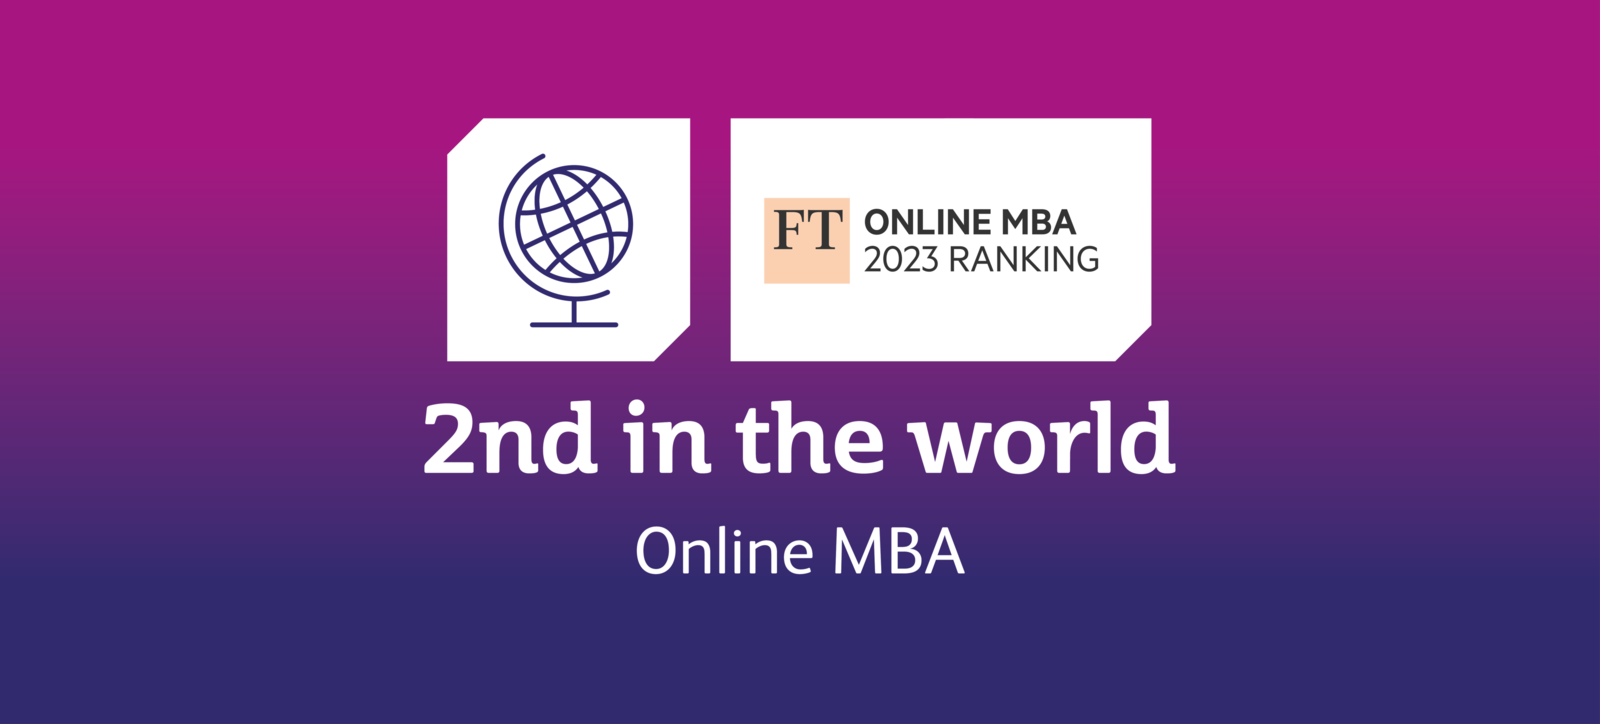 Financial Times logo and announcement that WBS was ranked second in the world in its online MBA ranking.